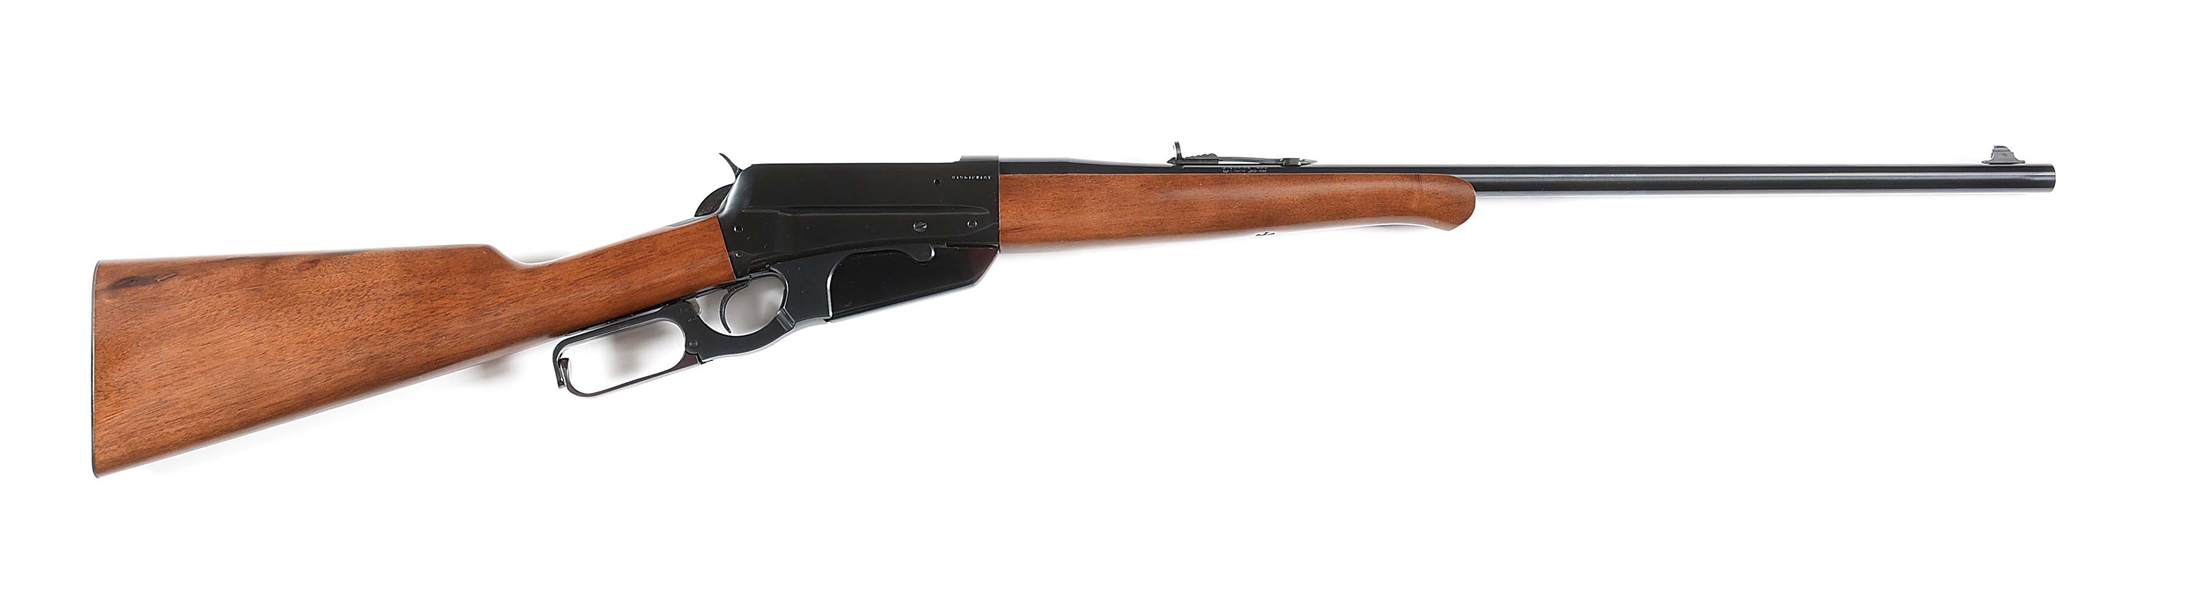 (M) BROWNING MODEL 1895 LEVER ACTION RIFLE IN .30-06 SPRINGFIELD.